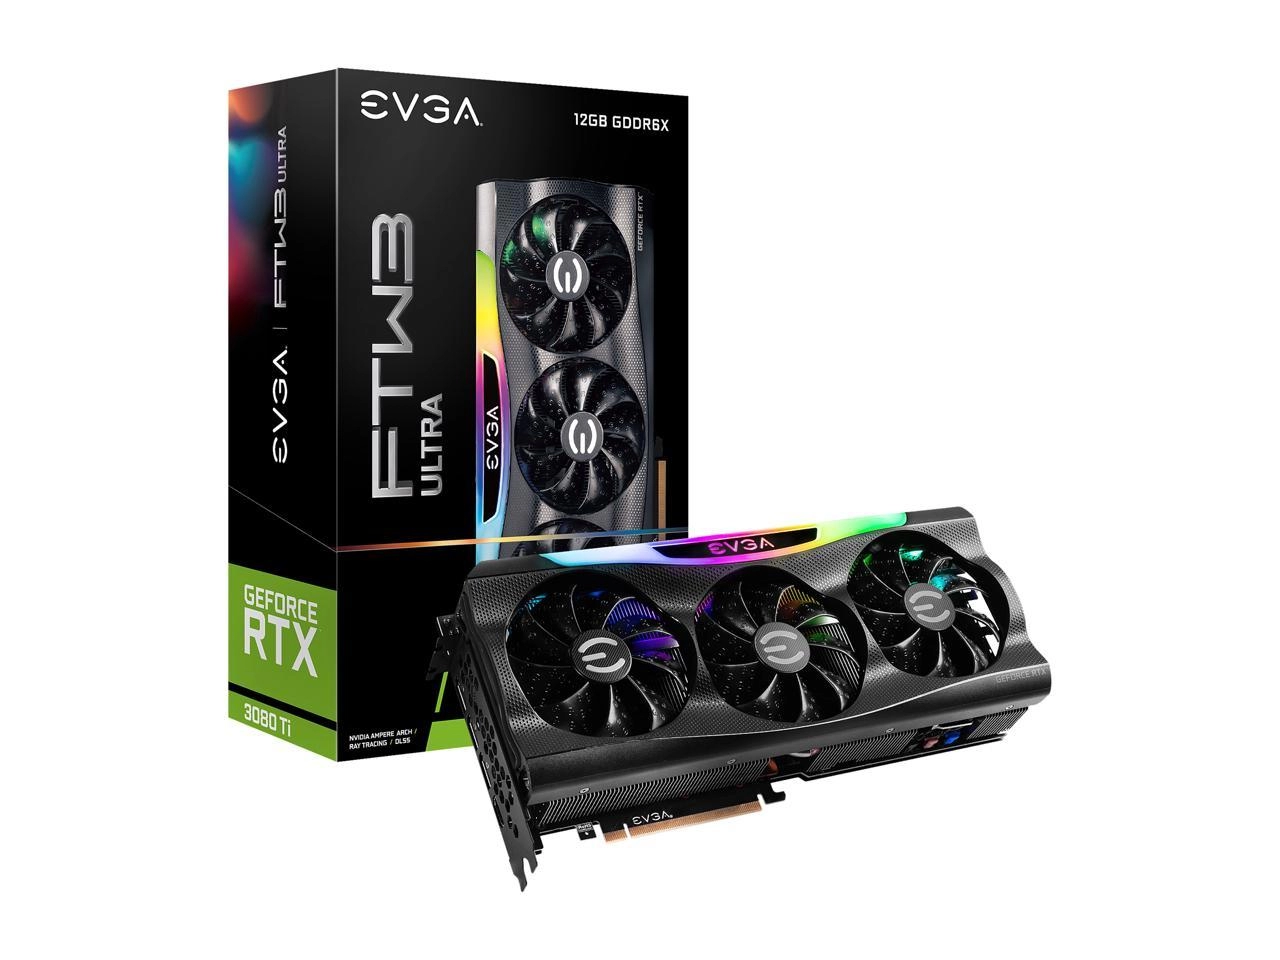 EVGA GeForce RTX 3080 Ti FTW3 ULTRA GAMING Package